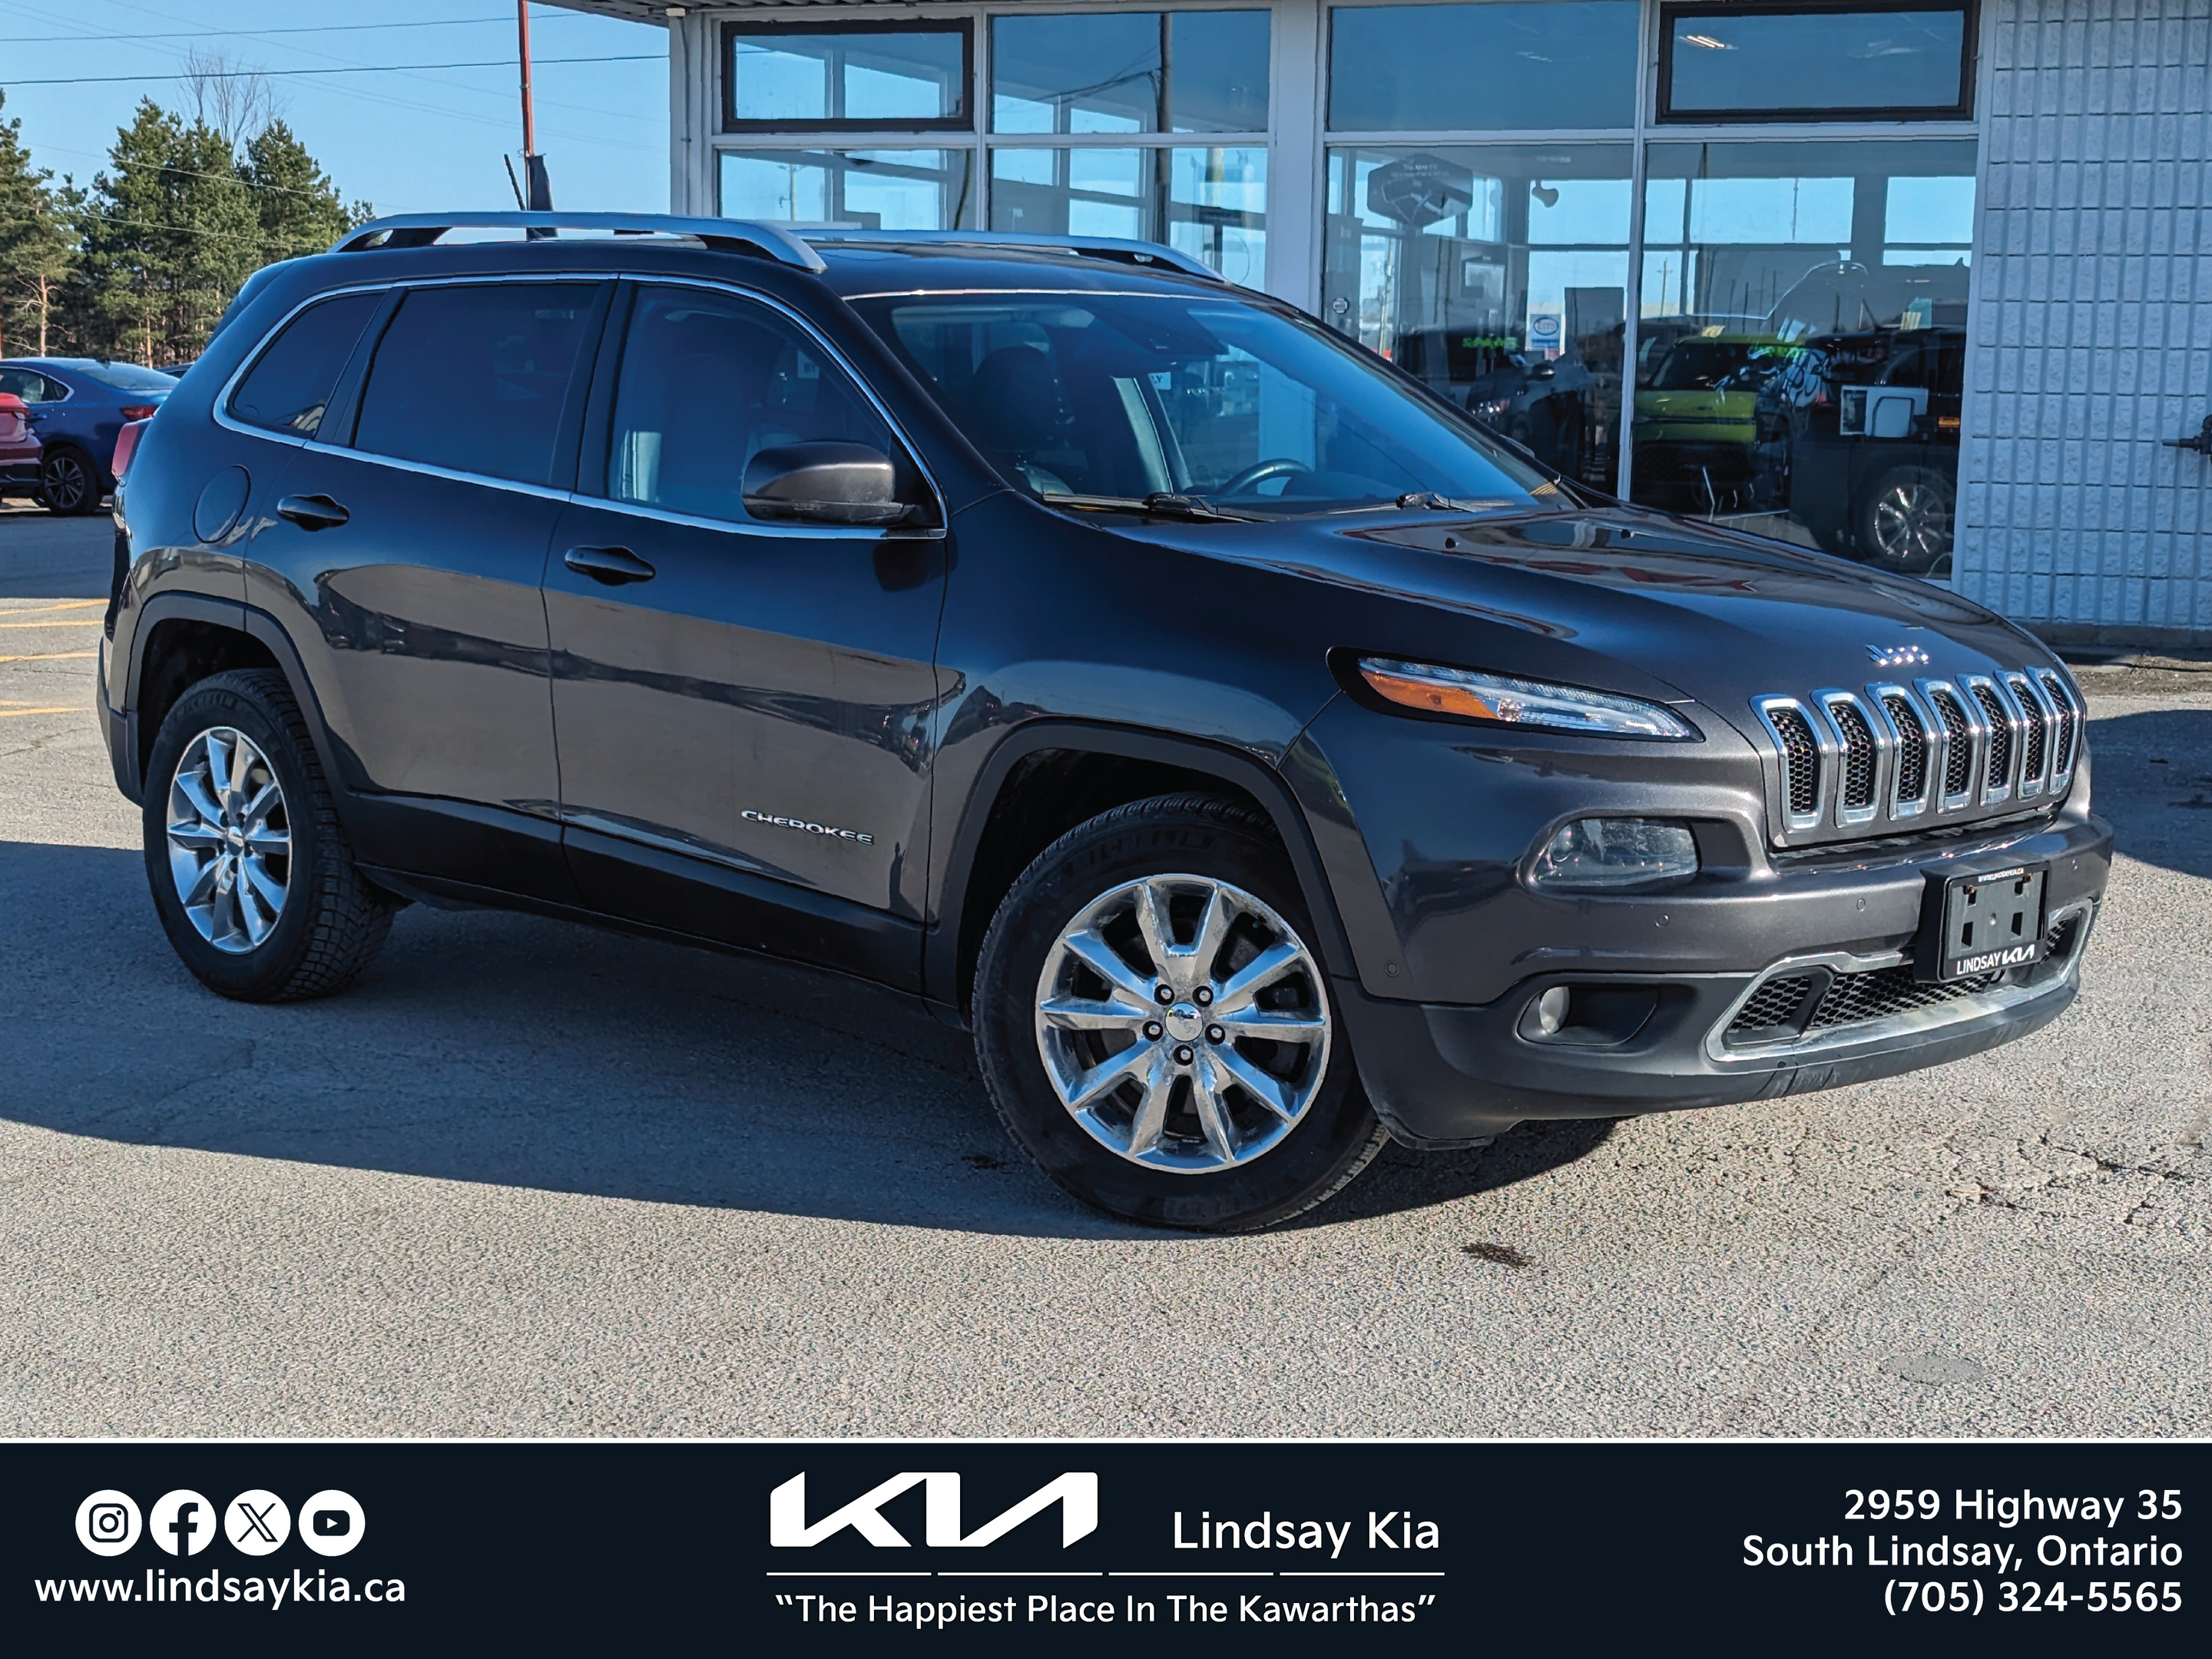 2015 Jeep Cherokee Limited V6 4WD | Panoramic Sunroof, Power Liftgate